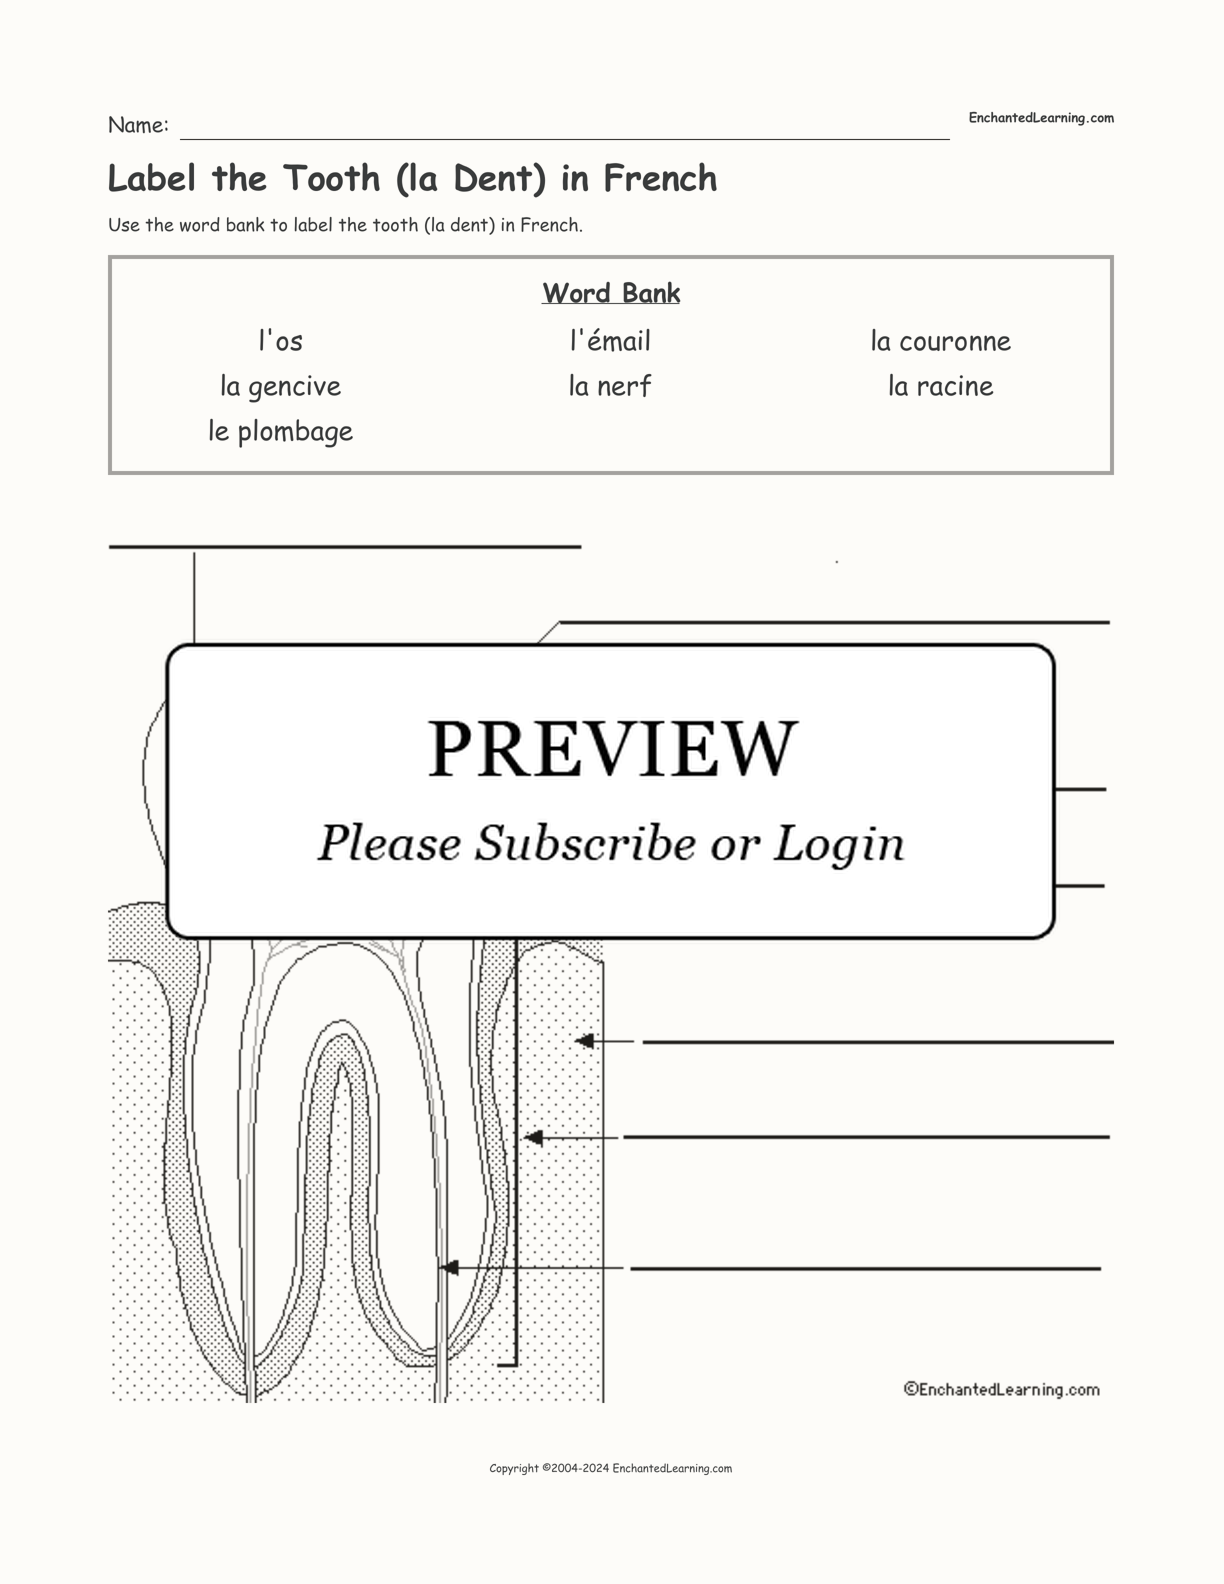 Label the Tooth (la Dent) in French interactive worksheet page 1